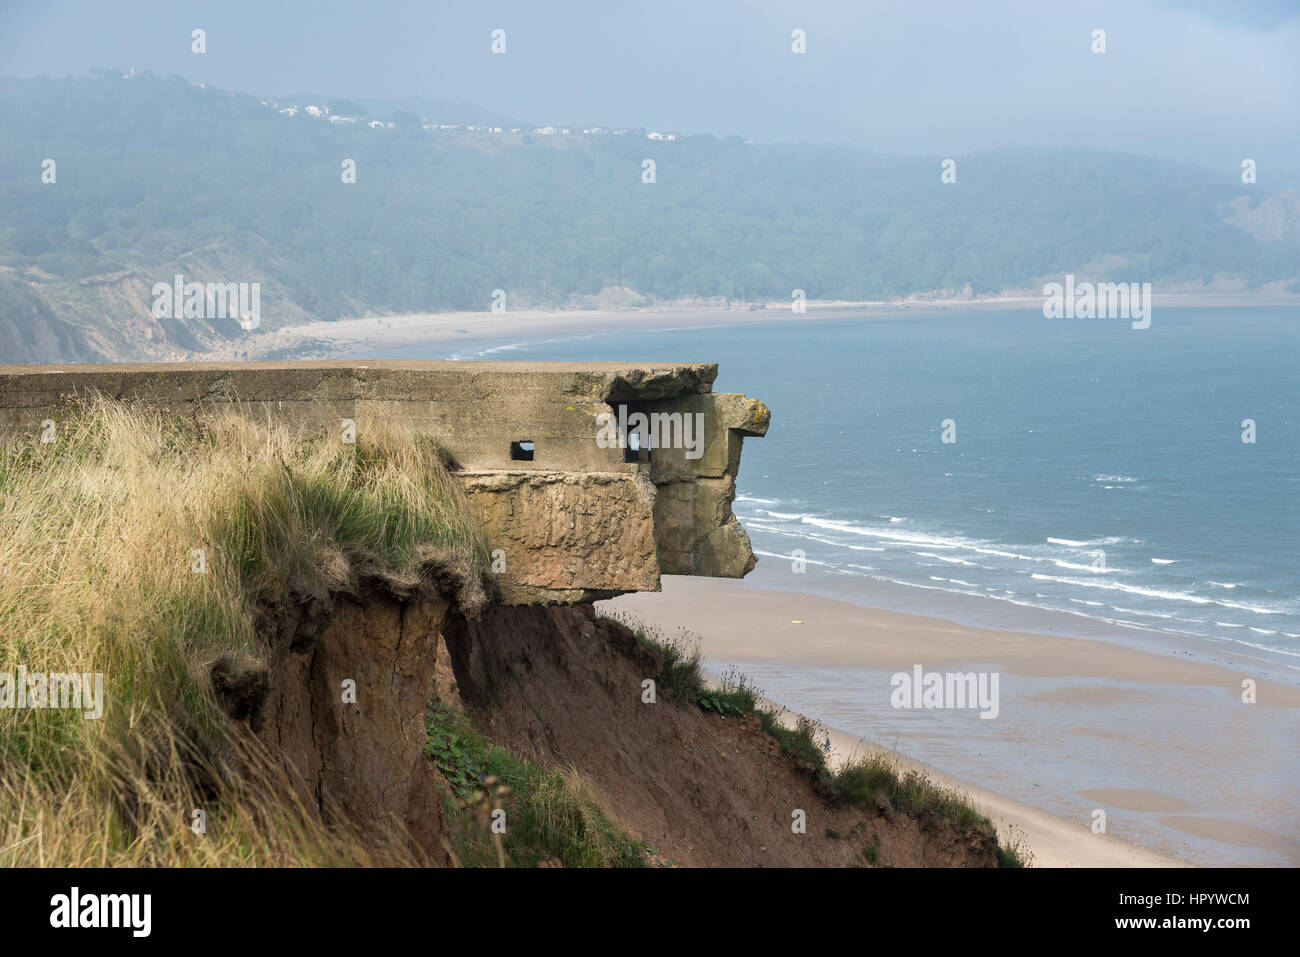 Remains of coastal defenses in the eroding cliffs above Cayton bay near Scarborough, North Yorkshire, England. Stock Photo